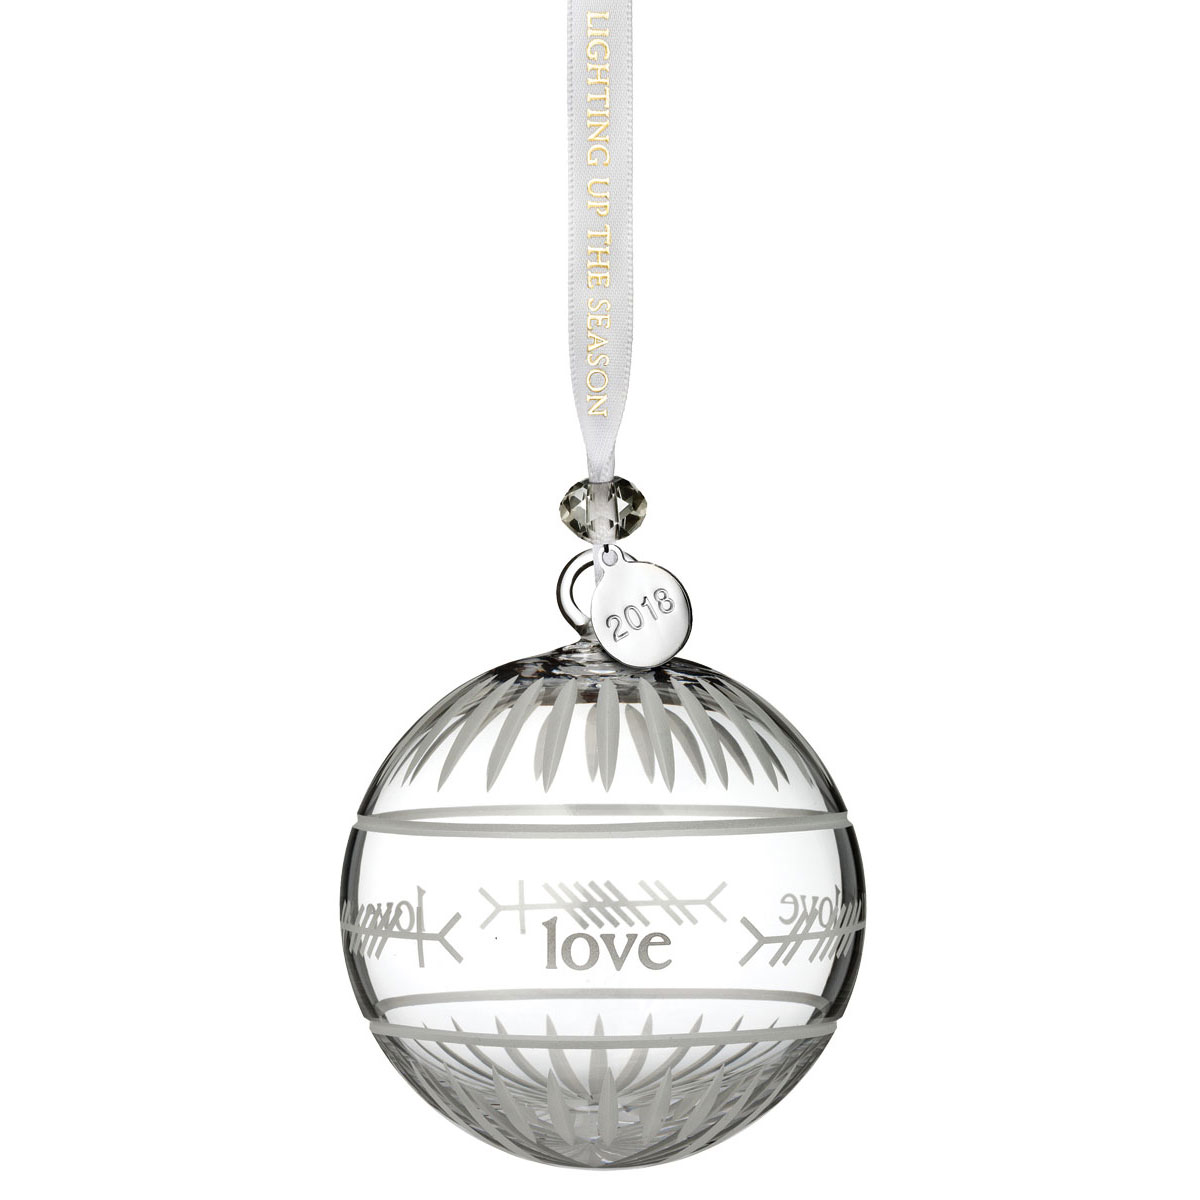 Waterford Crystal 2018 Ogham Love Ball Ornament